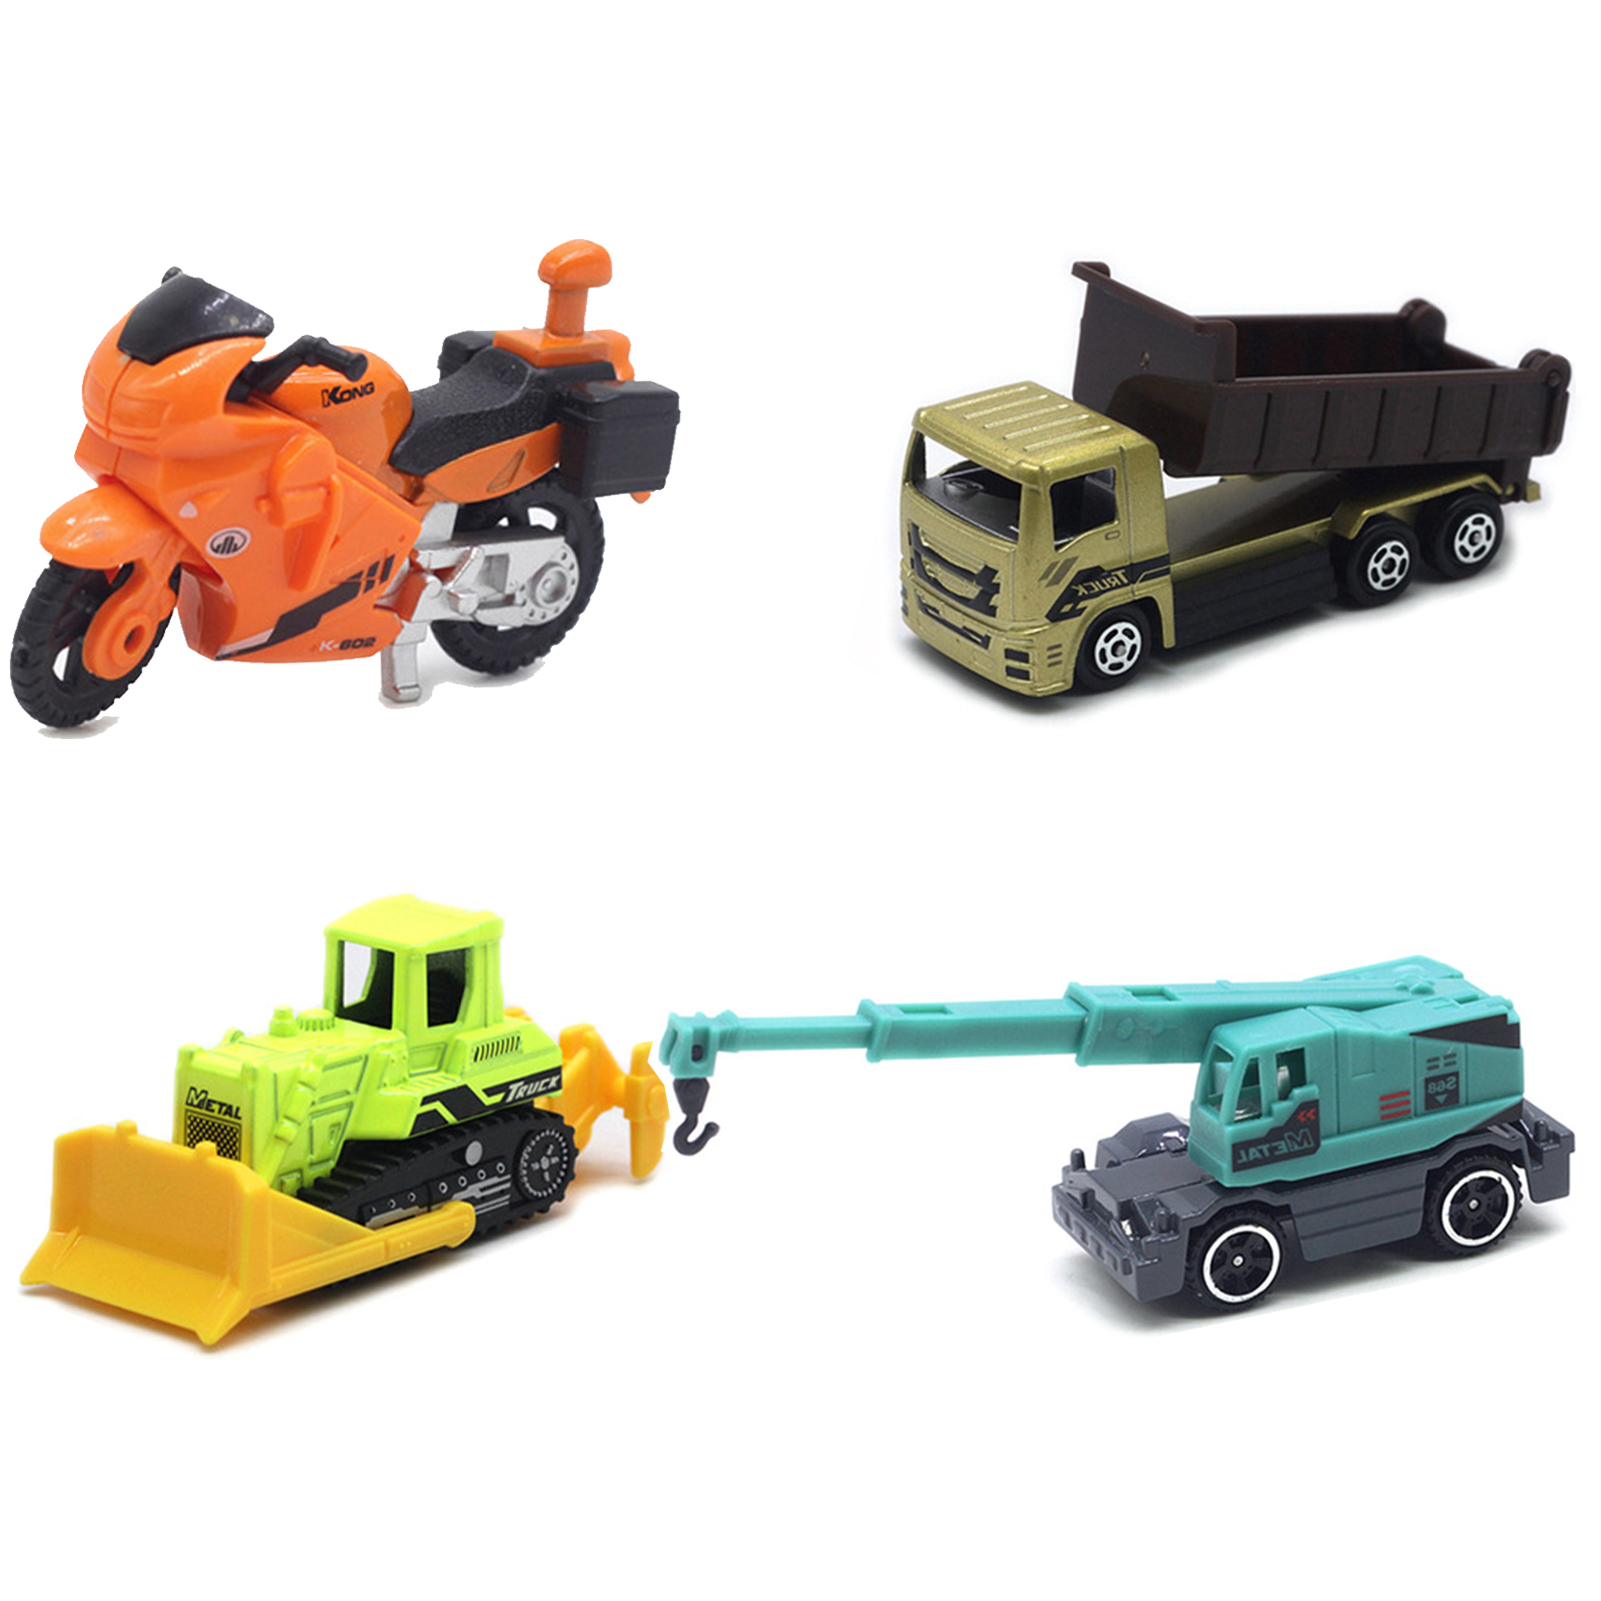 Pnellth 4Pcs/Set Engineering Trunk Toys Simulation Cranes Forklift Cargo Truck Diecast Alloy Vehicle Toy 1:64 Scale Engineering Vehicle Aircraft Motorcycle Models Set Christmas Gift - image 1 of 8